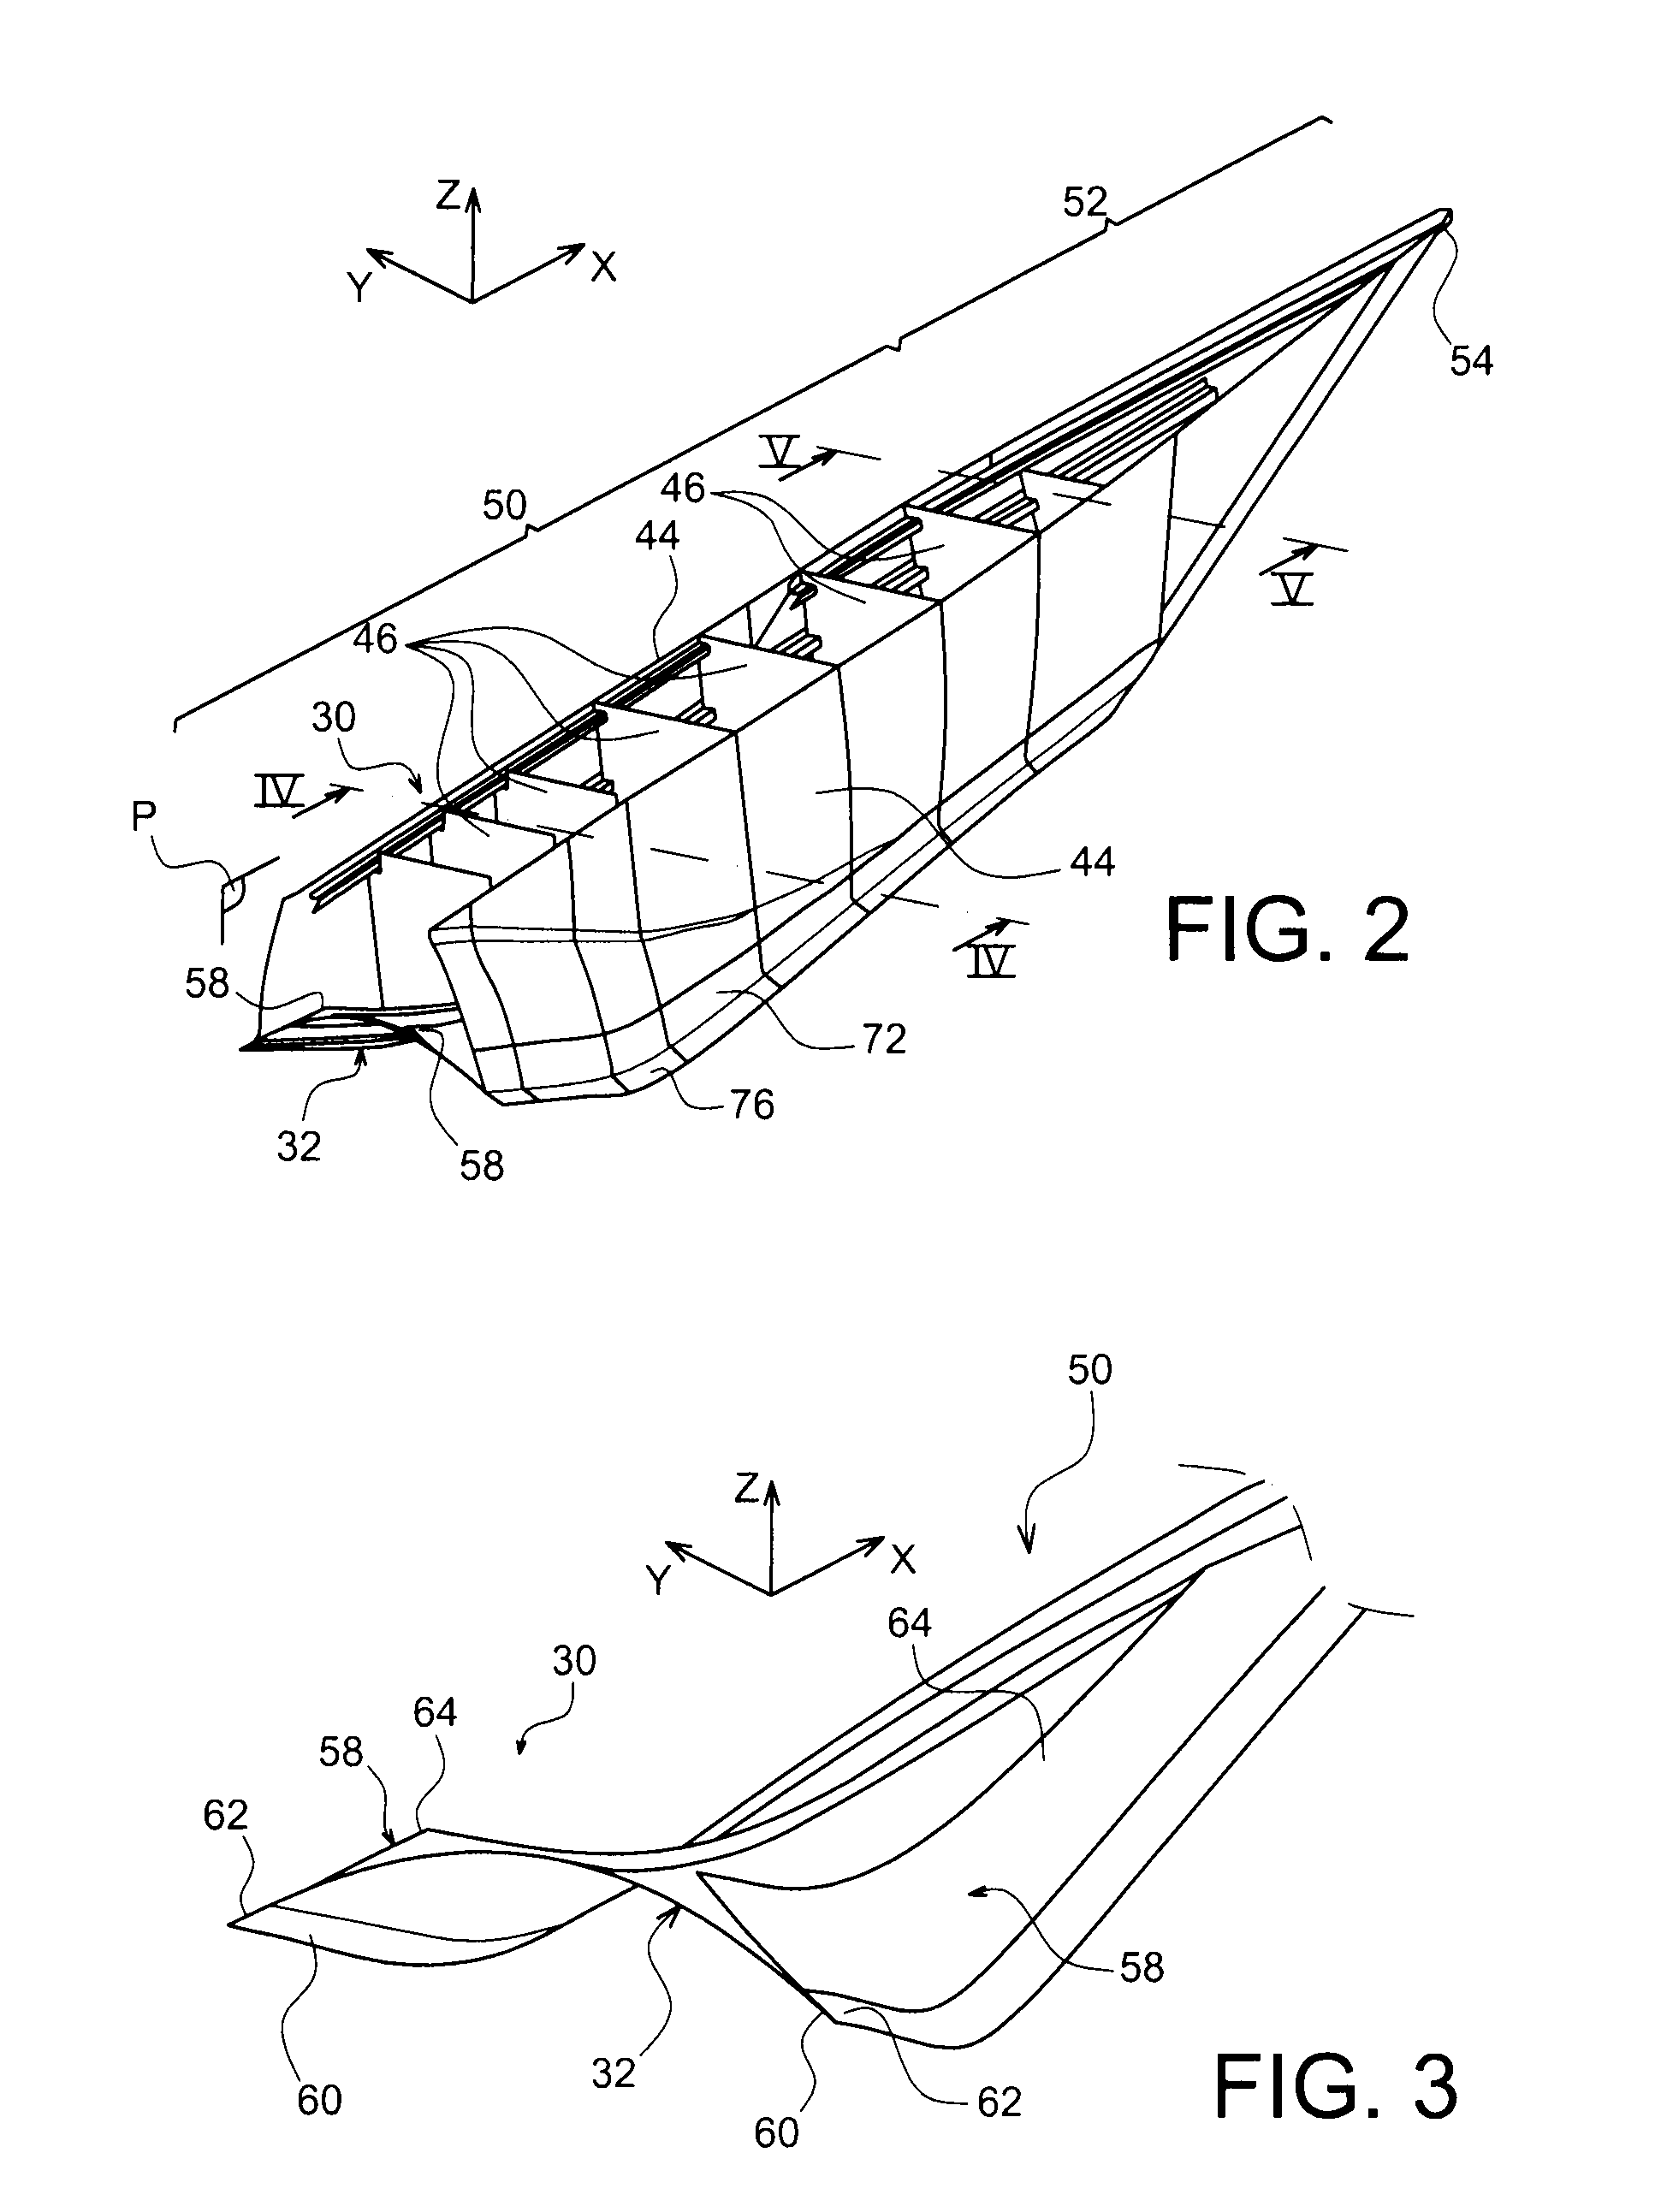 Aft pylon fairing for an aircraft engine suspension system